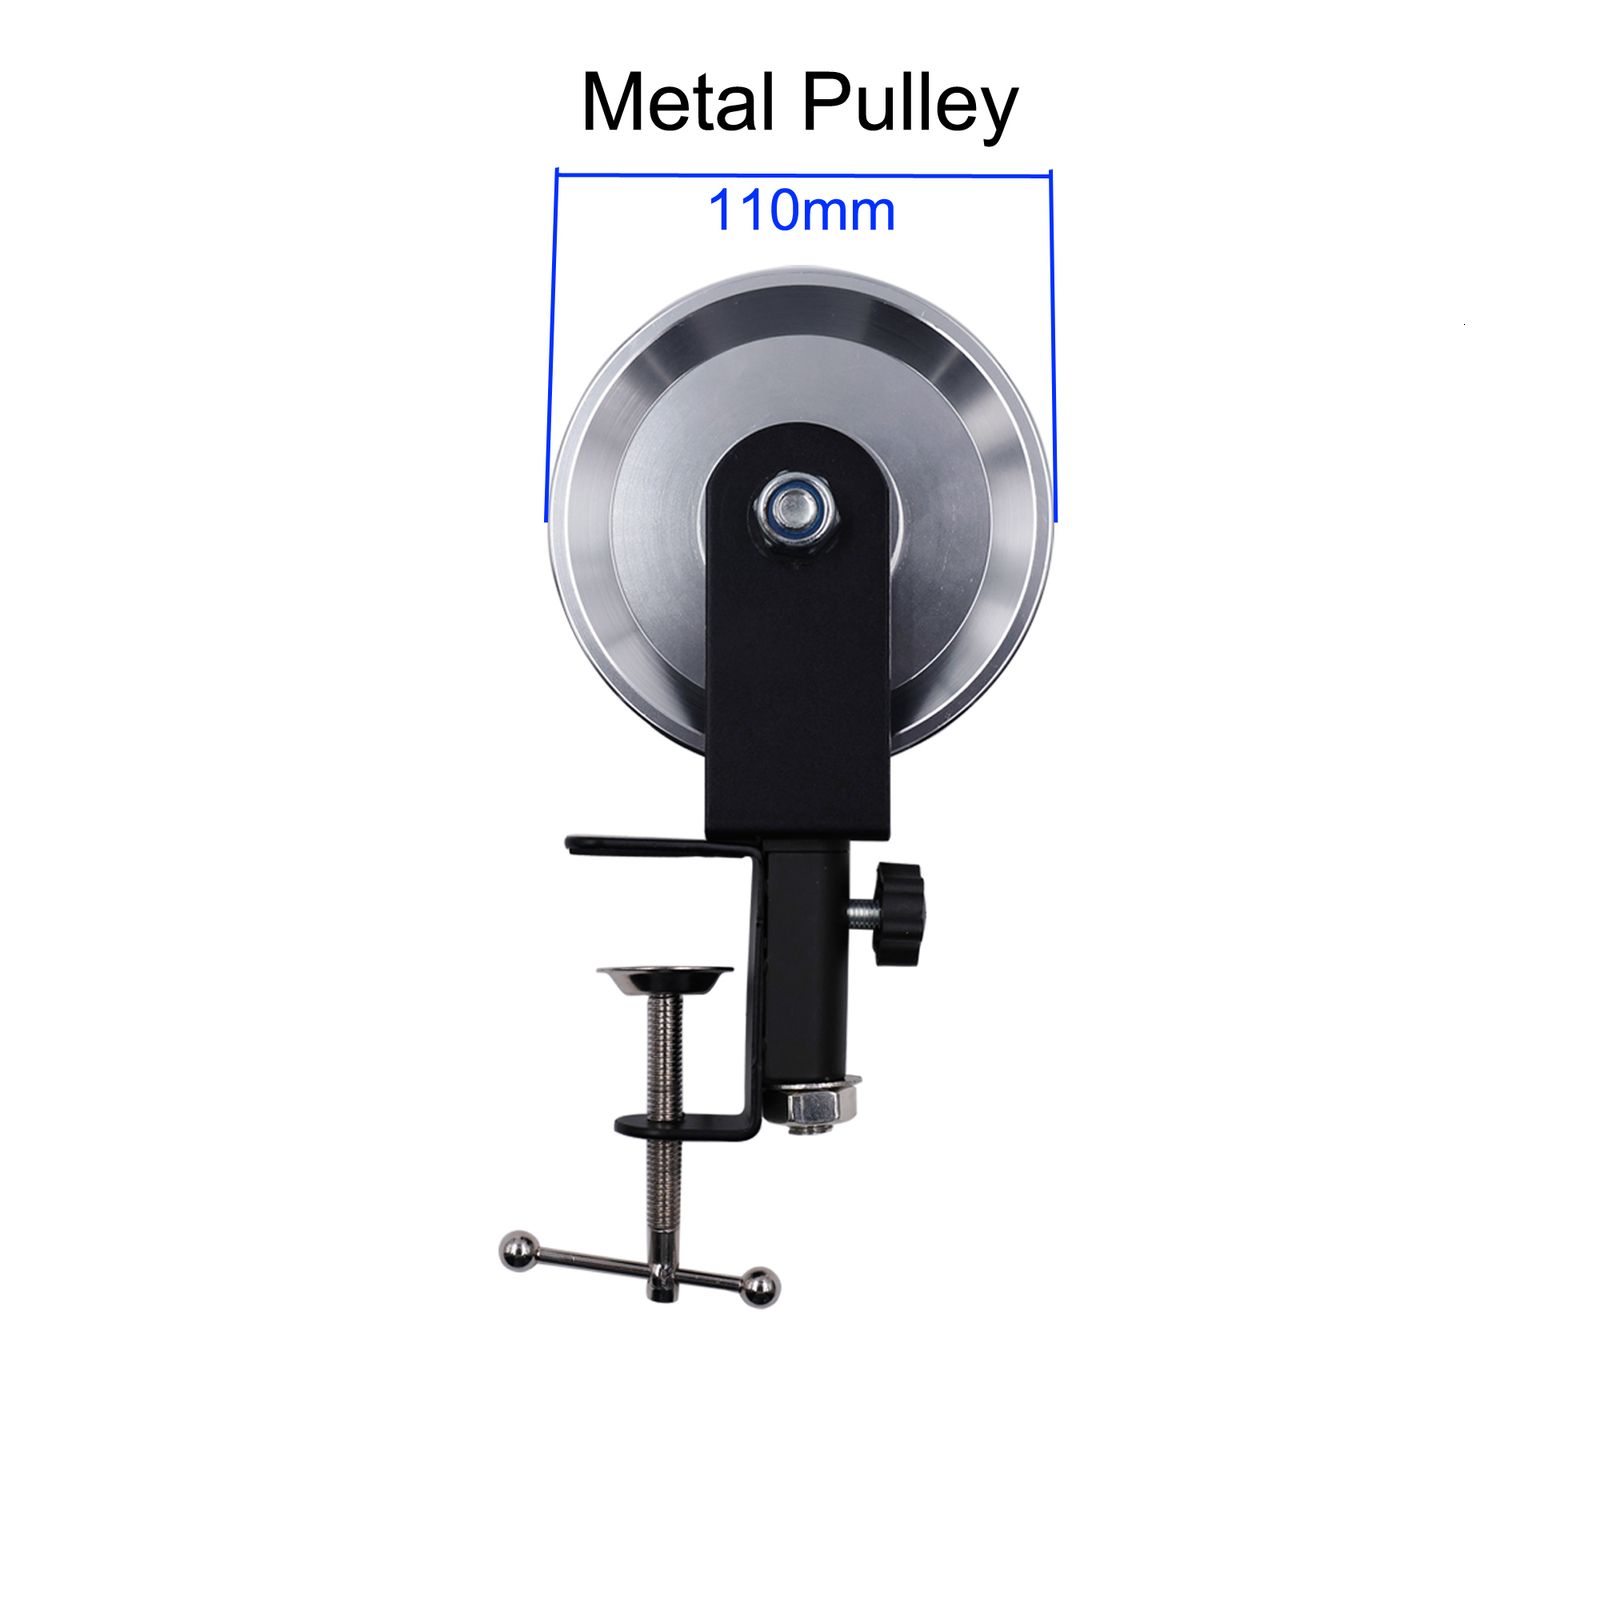 Options:Metal Pulley